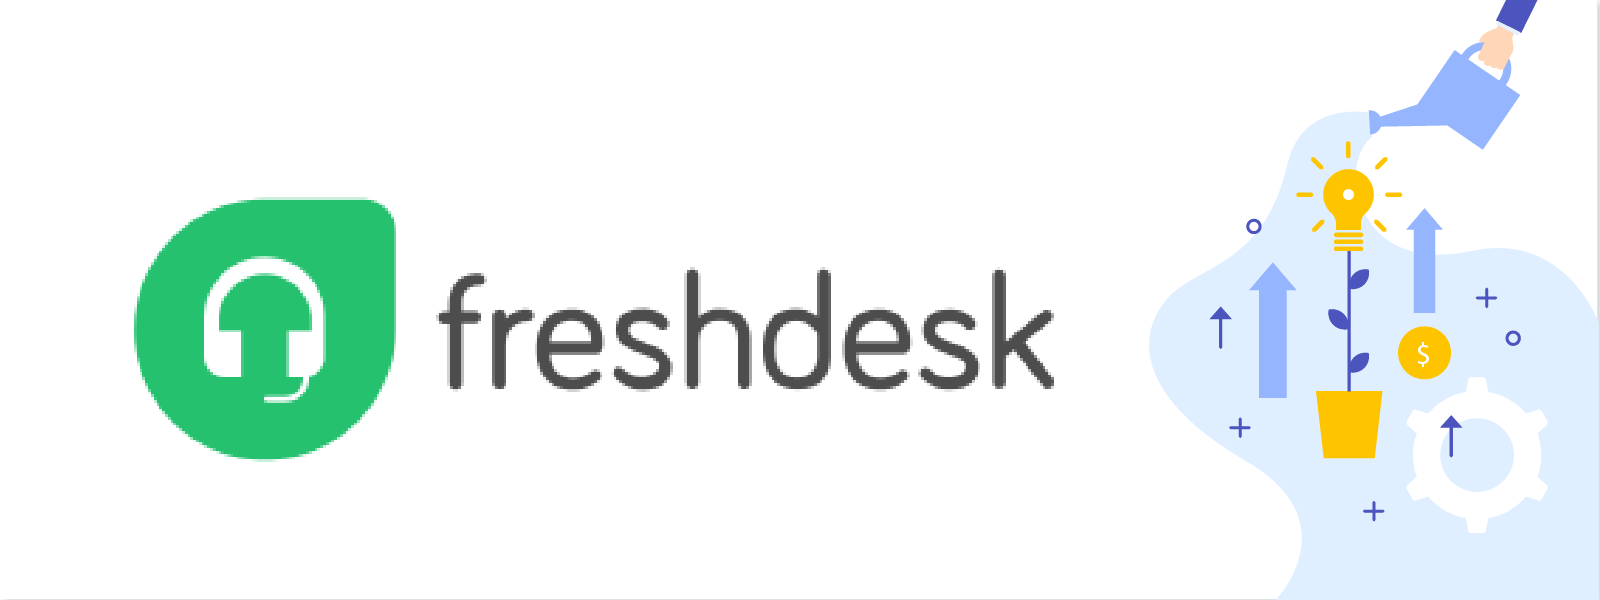 Using the Freshdesk to NetSuite Integration to Boost Revenue for eCommerce companies